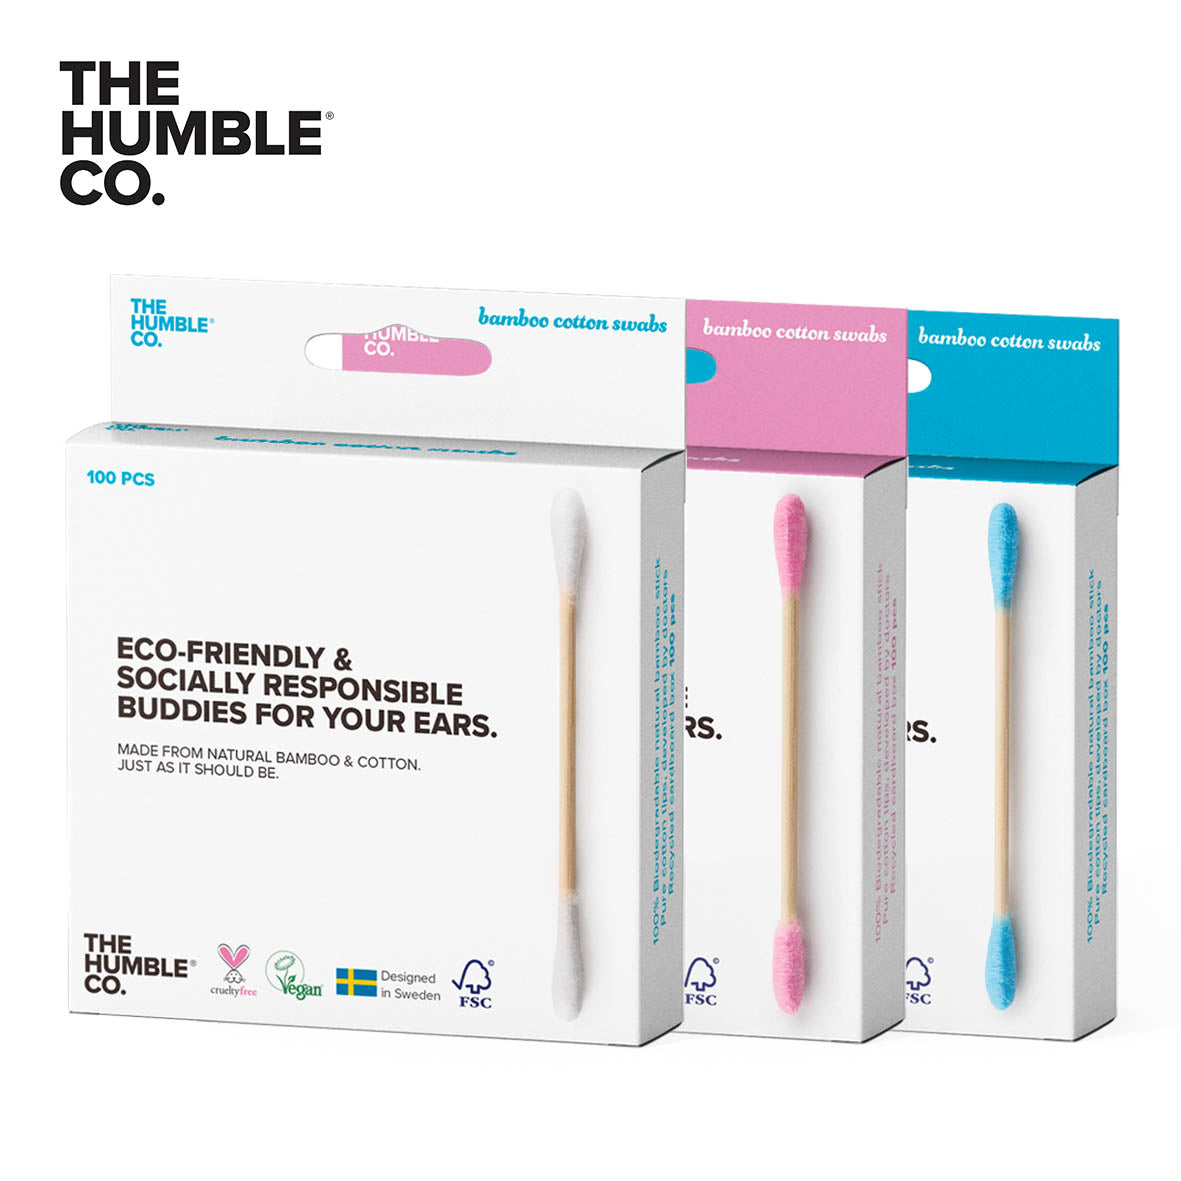 THE HUMBLE & CO Bamboo/Cotton Bud 100-Pack (1469274259521)